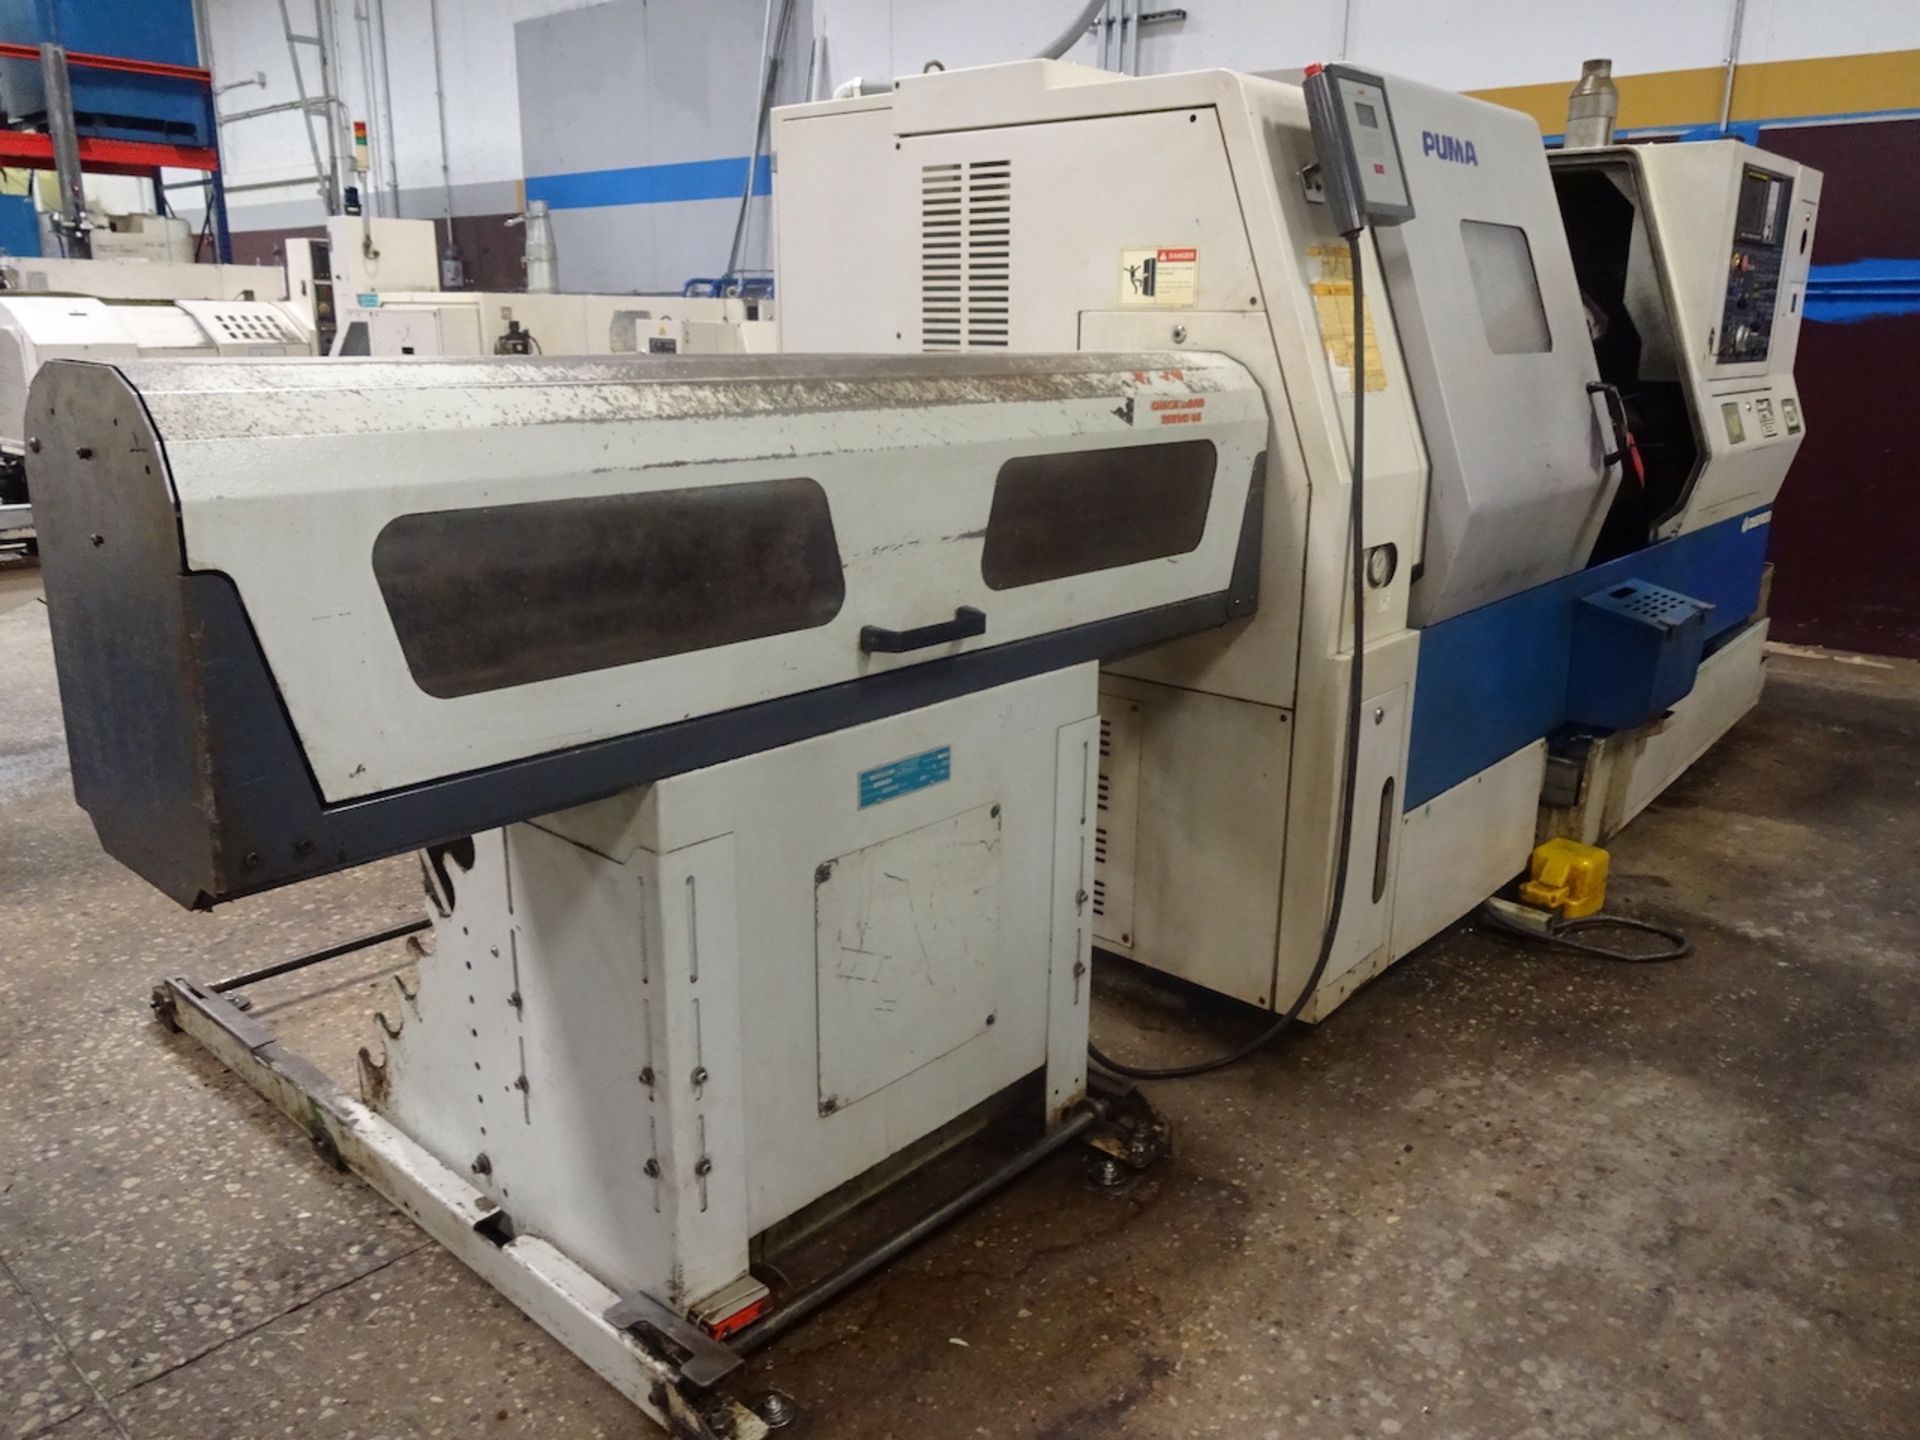 2003 DAEWOO MODEL PUMA 240LMB CNC 2-AXIS TURNING CENTER, S/N P24M0175, 8 IN. 3-JAW CHUCK, 12- - Image 8 of 8